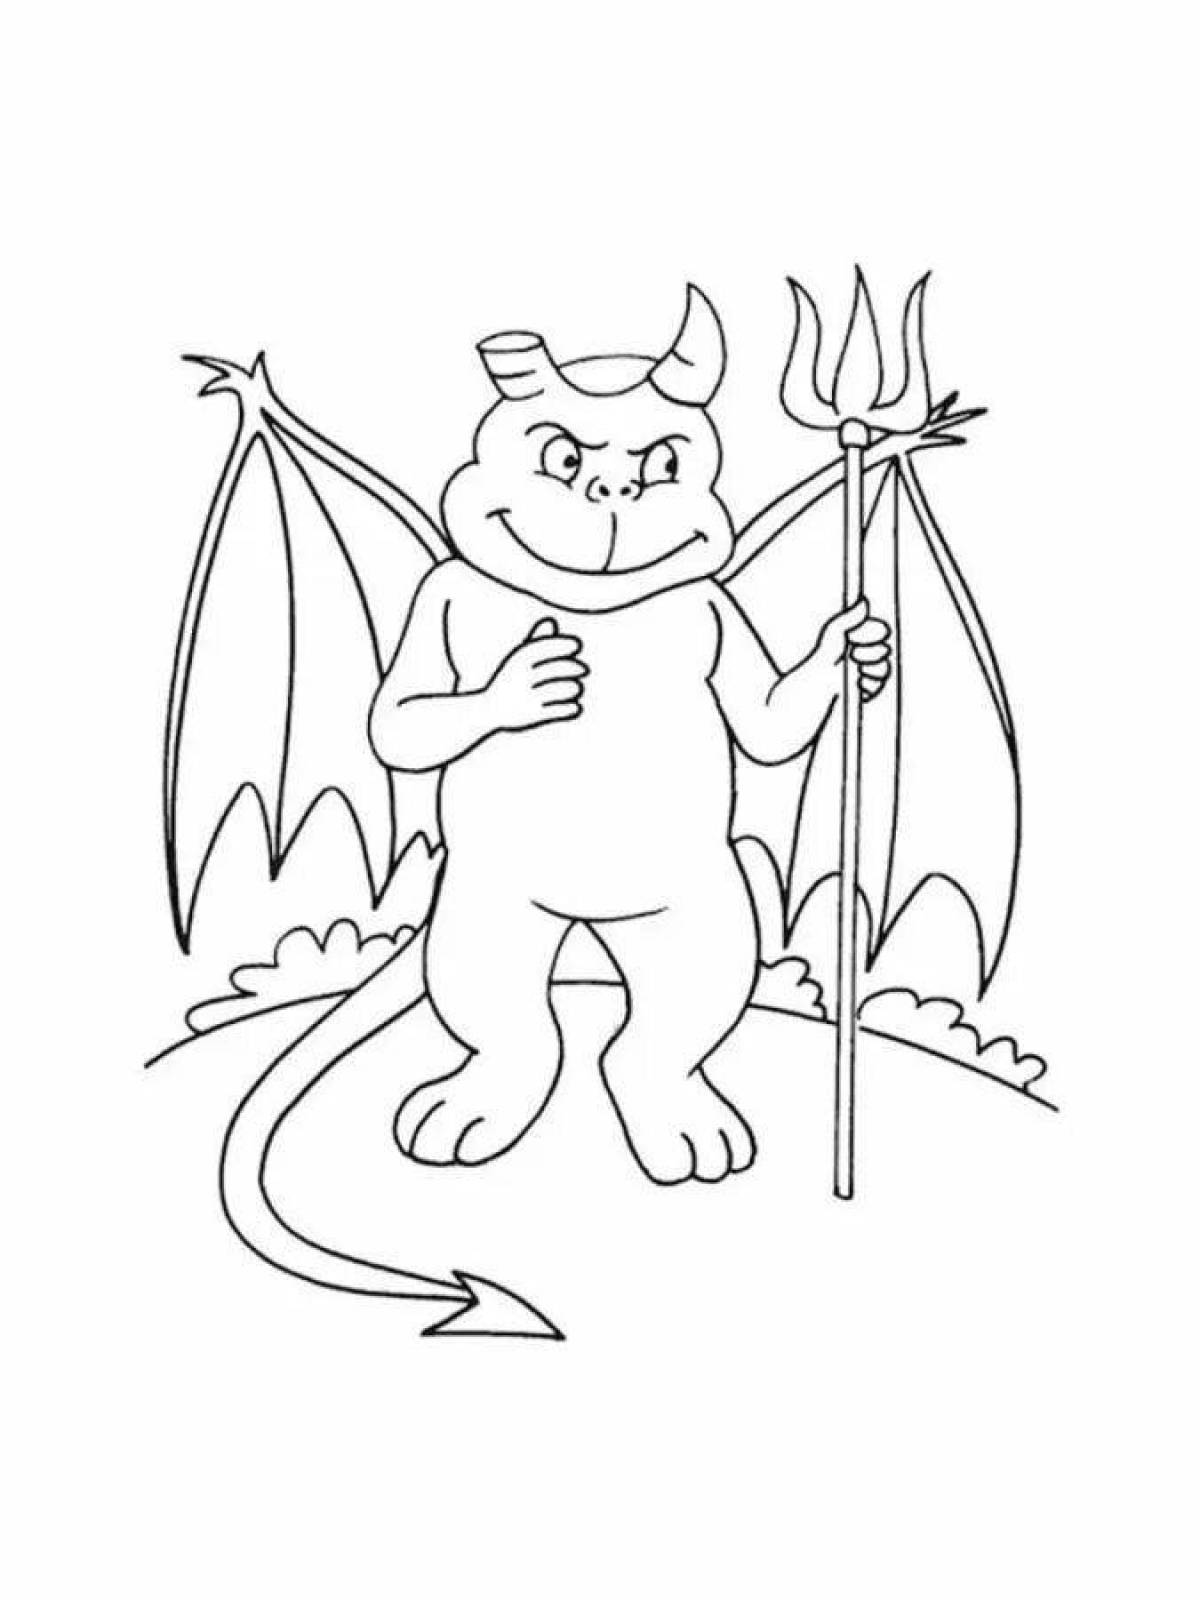 Scary devil coloring book